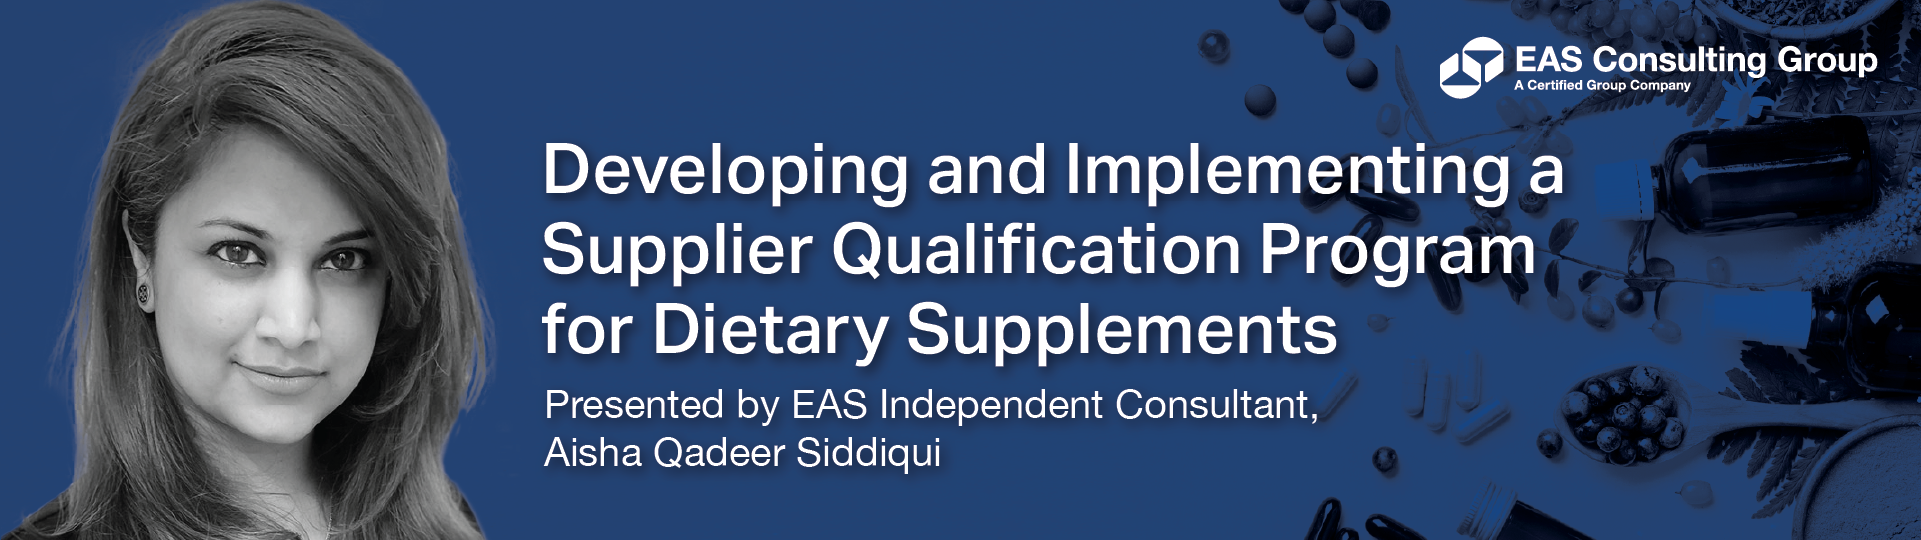 Developing and Implementing a Supplier Qualification Program for Dietary Supplements